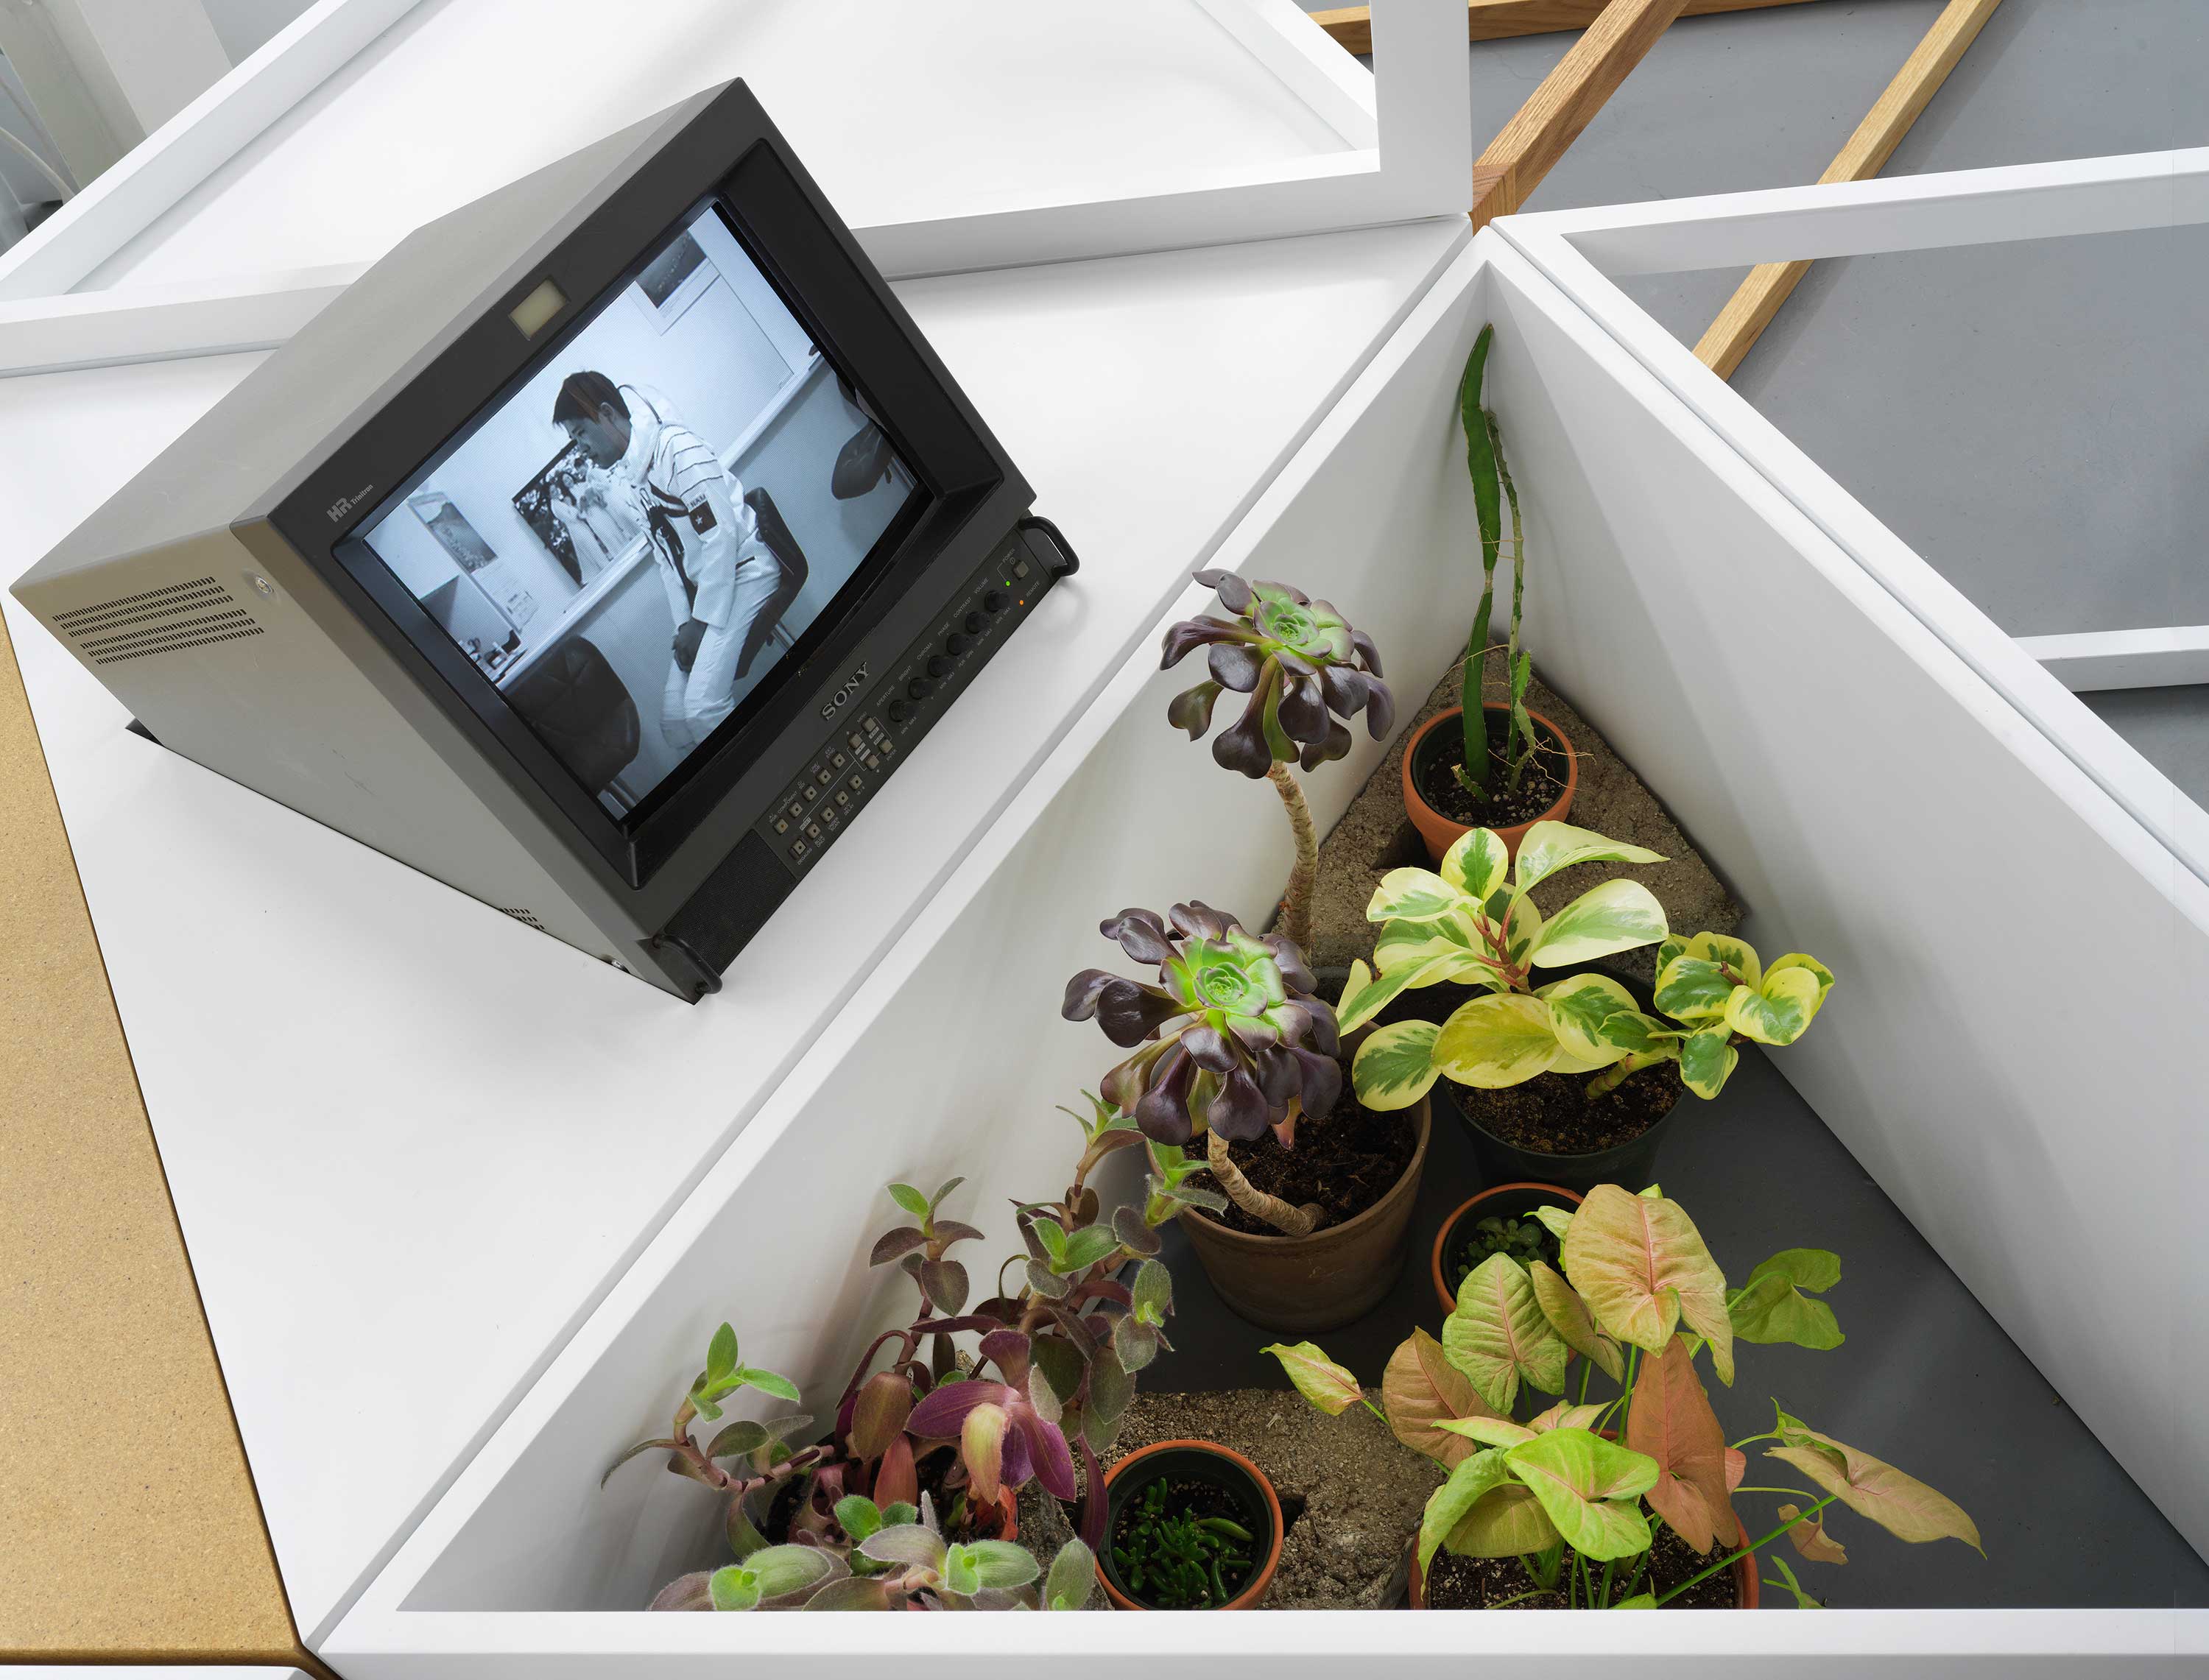 A downward view of the installation In the Shadow of the Future that displays tropical houseplants and a SONY Triniton monitor that is positioned at an angle. On the monitor is a black and white image of a person in an astronaut suit sitting on a chair and looking to the left.